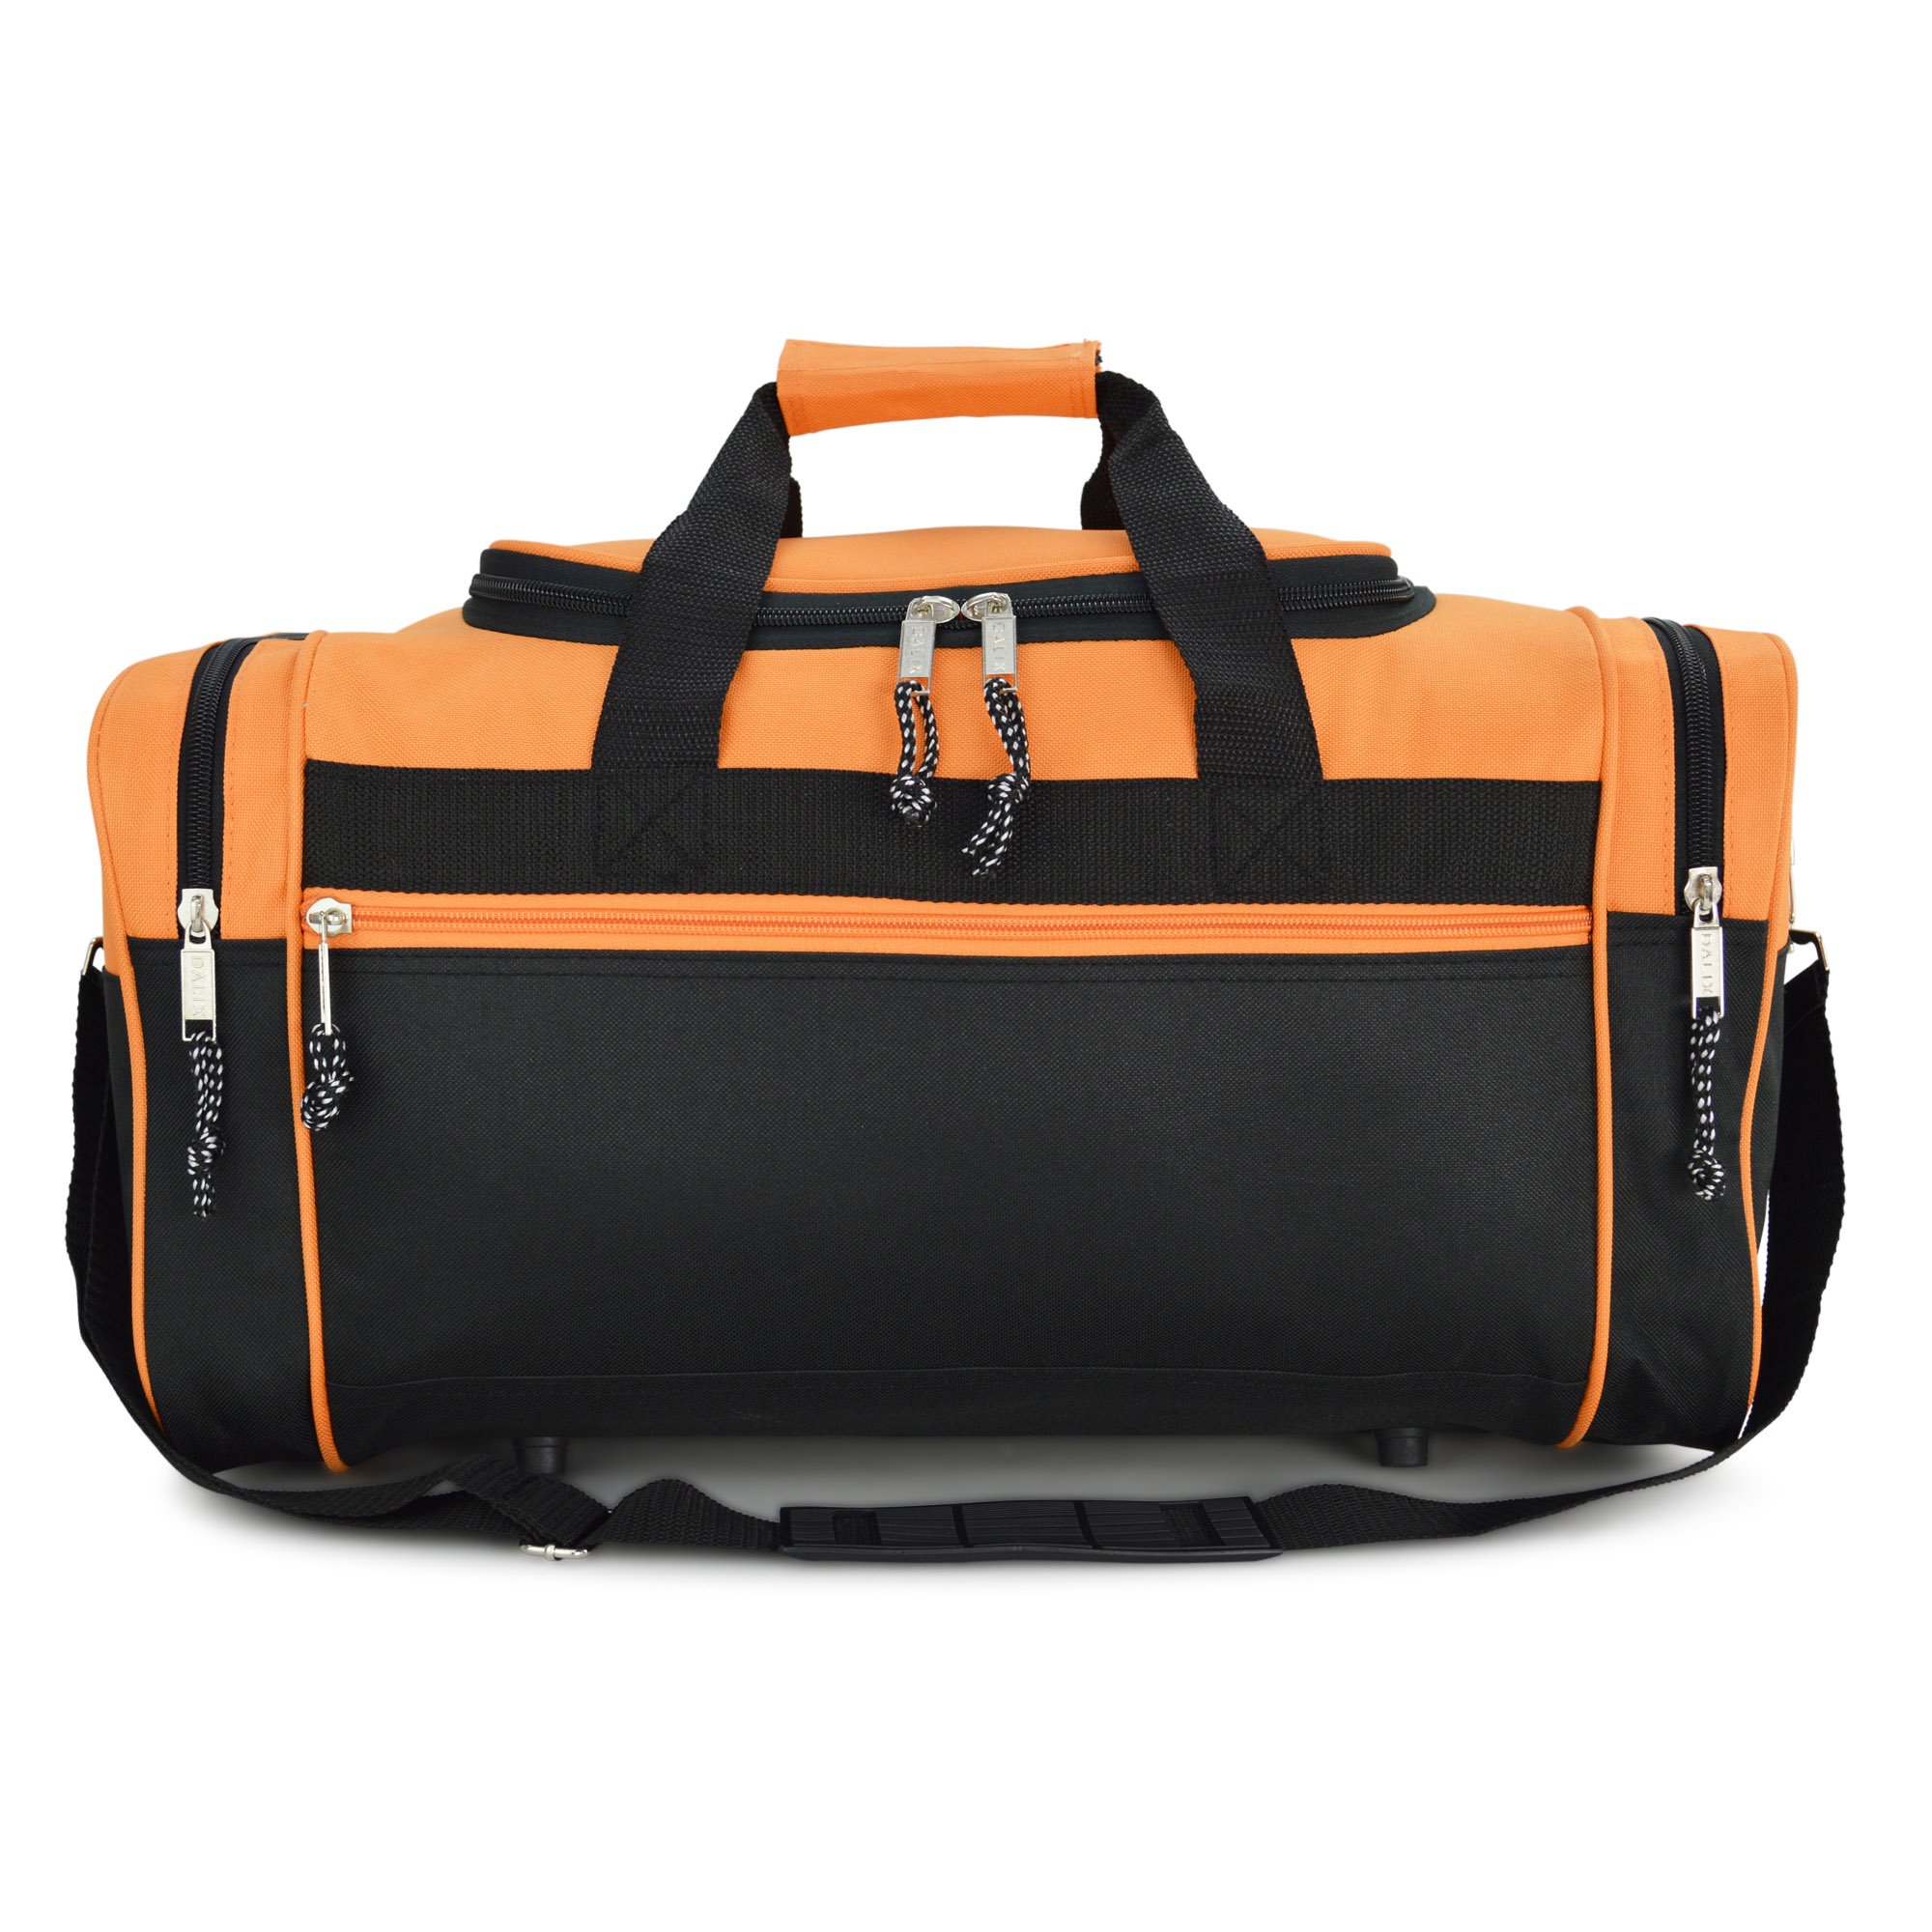 Hot Sale Large Capacity Waterproof Sport Gym Travel Duffel Bag With Shoe Compartment